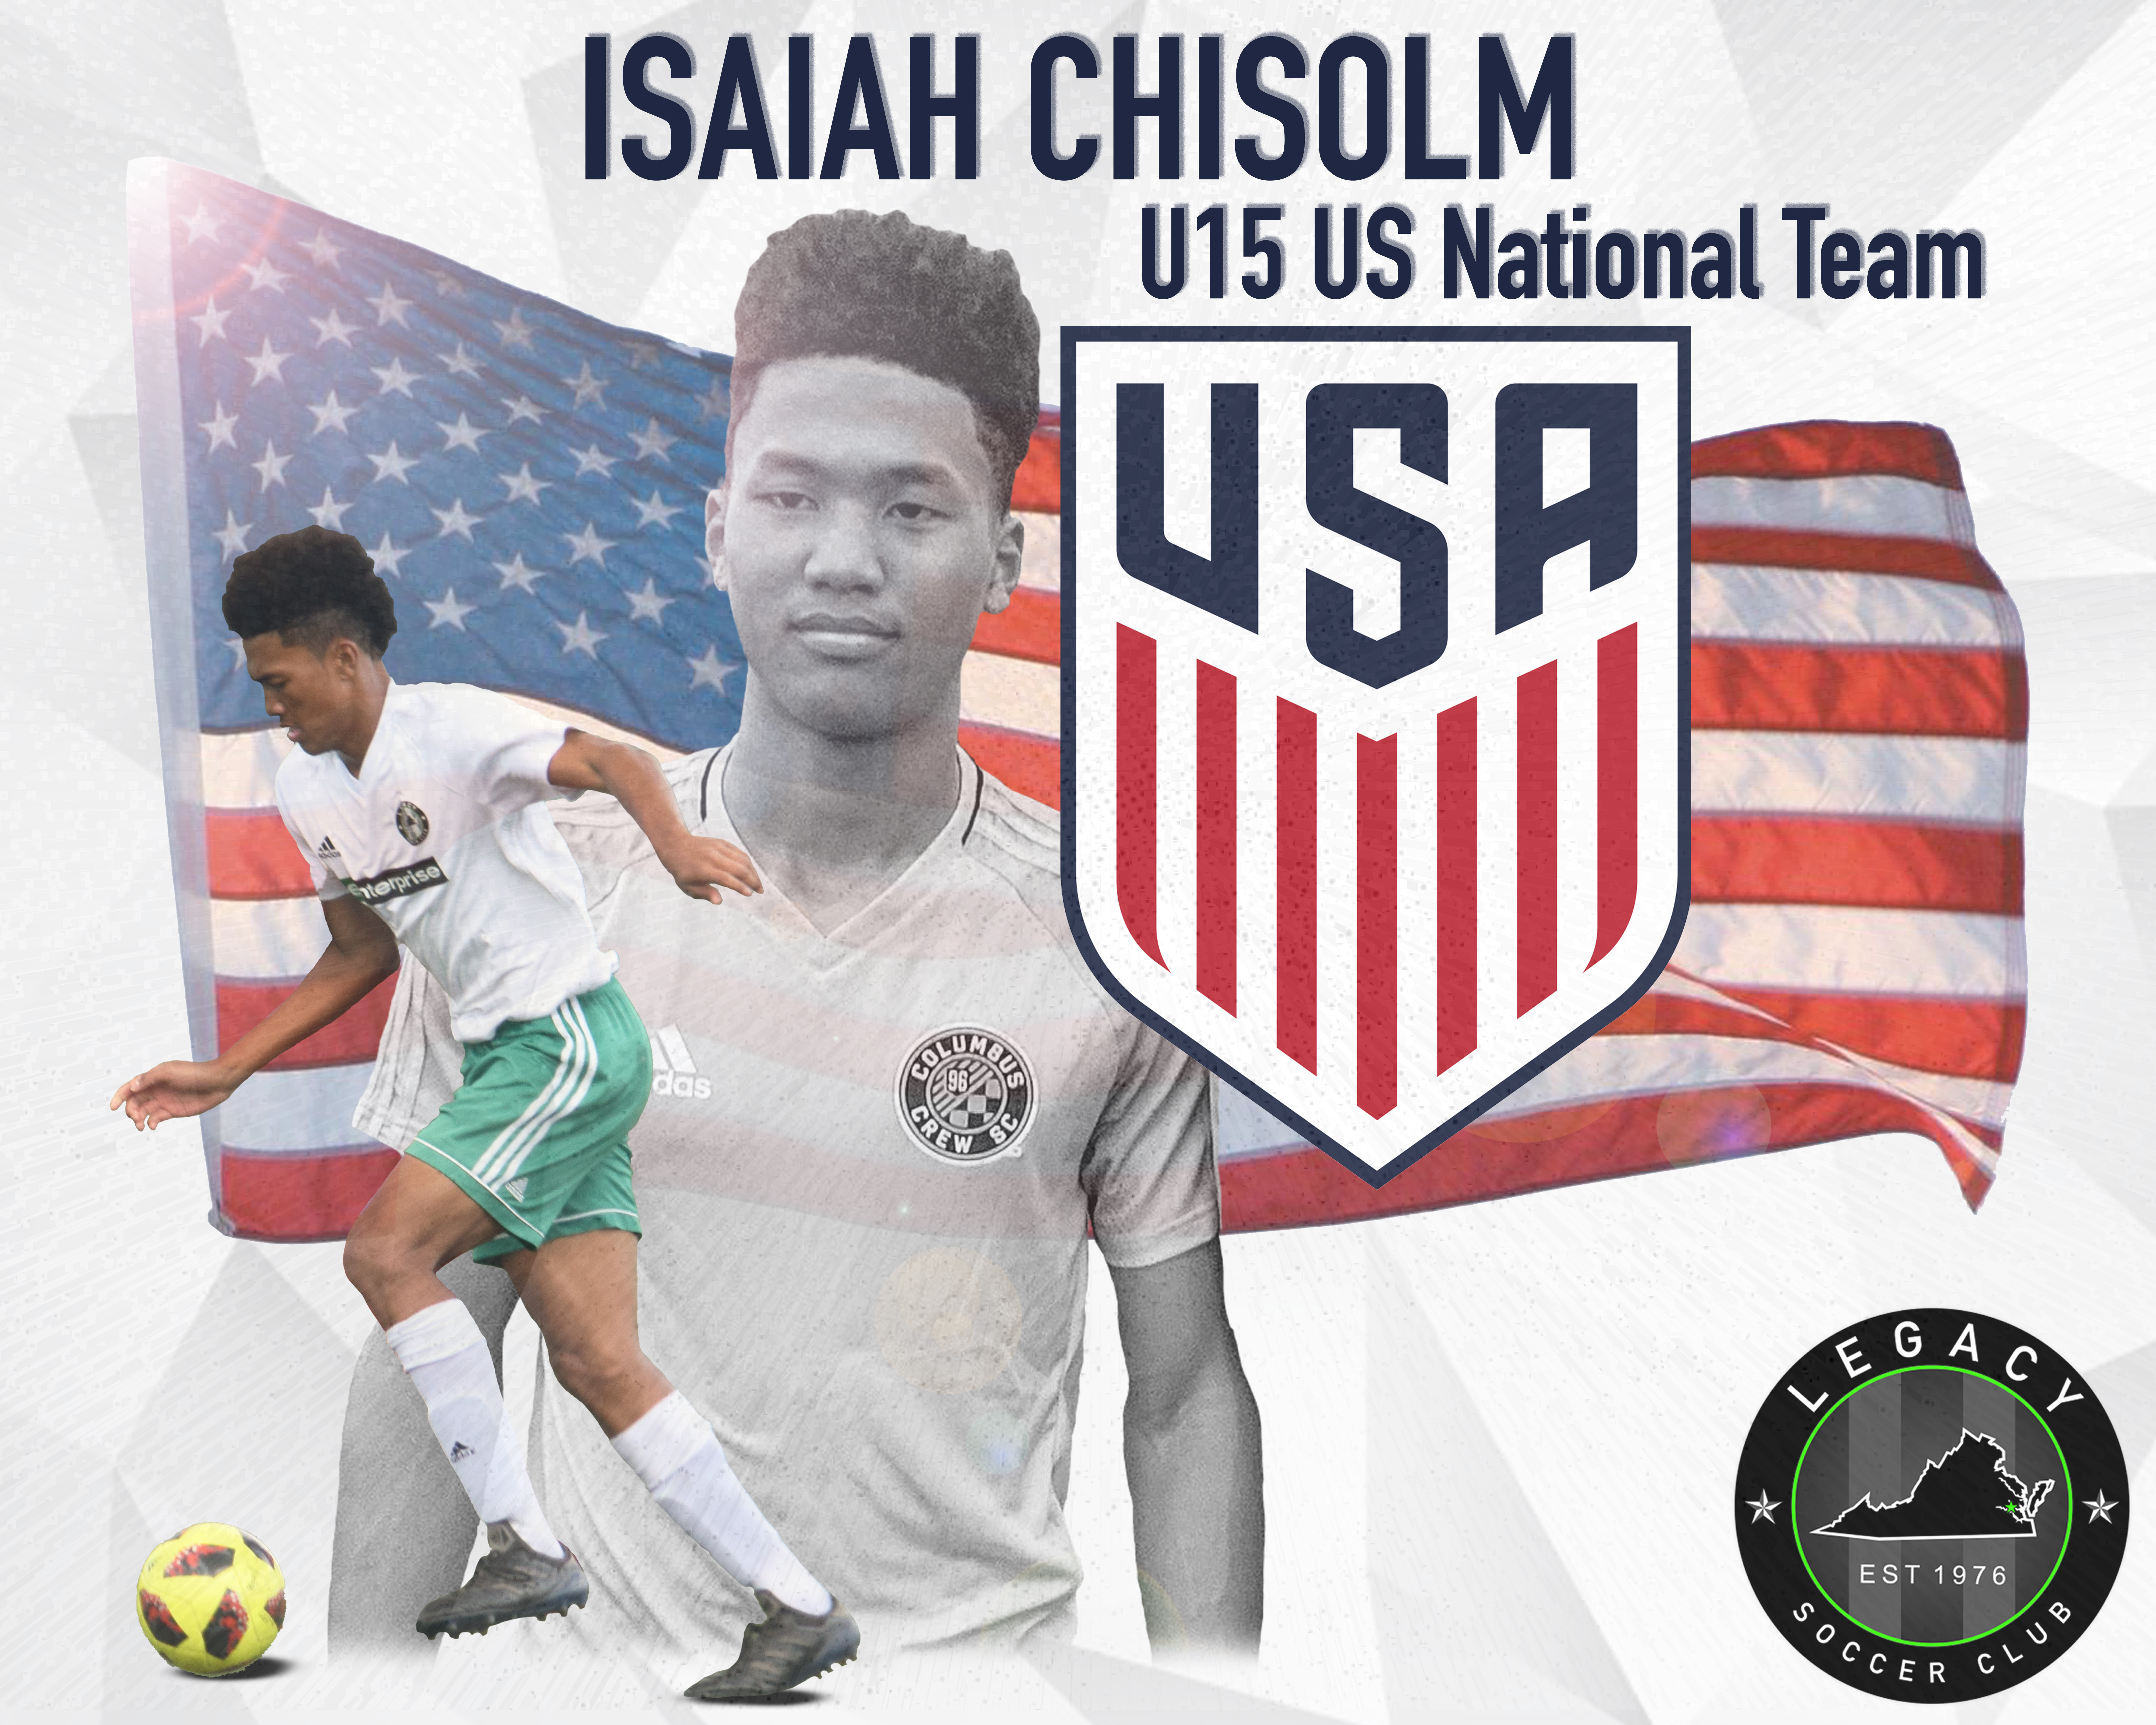 Isaiah Chisolm Selected to U15 Youth US National Team